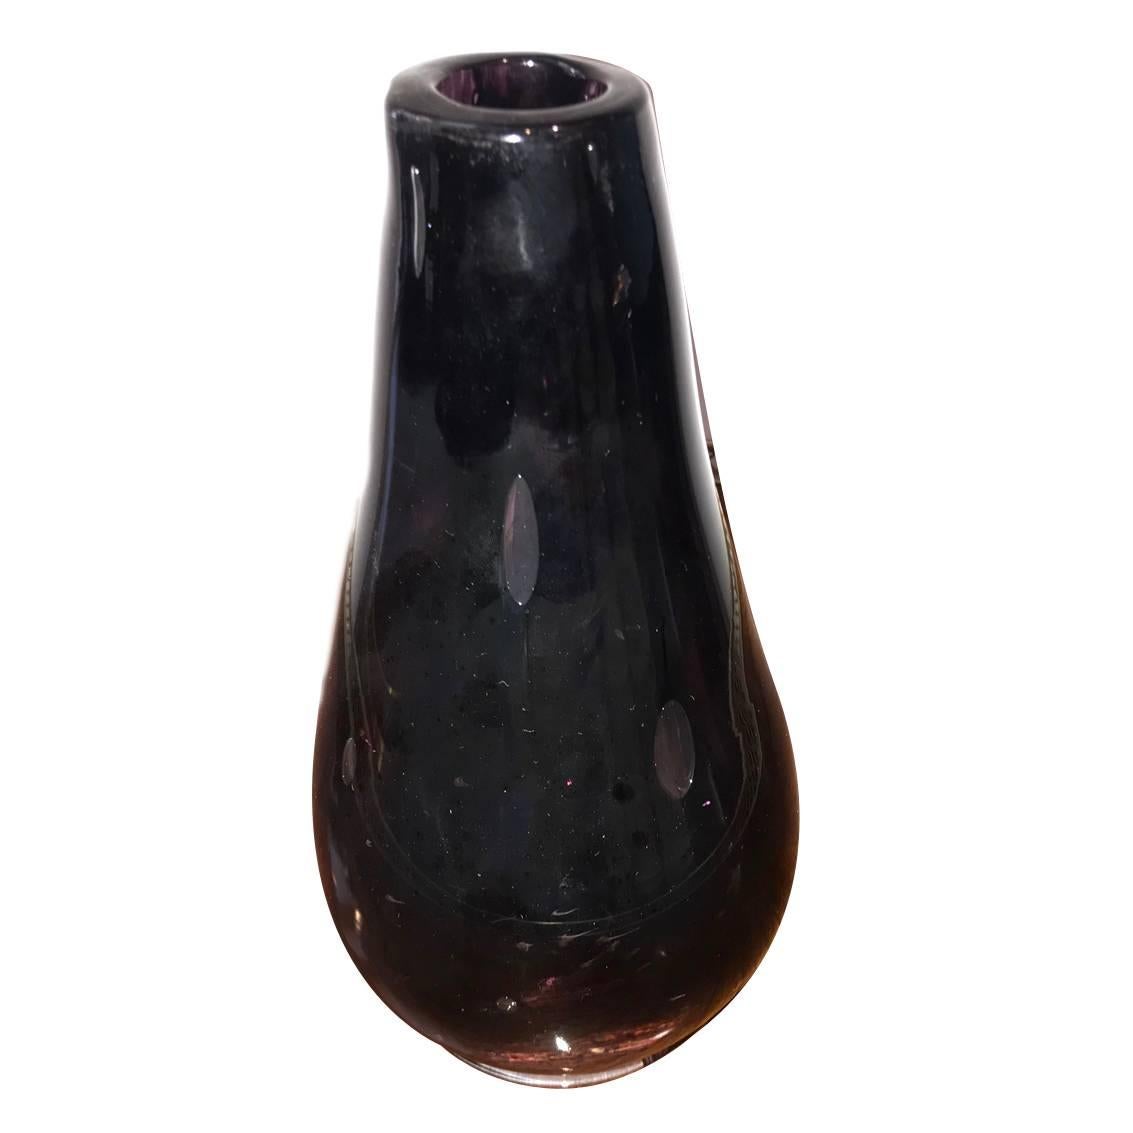 A blown Murano glass vase, deep amethyst color.
Measurements:
Height 9.5